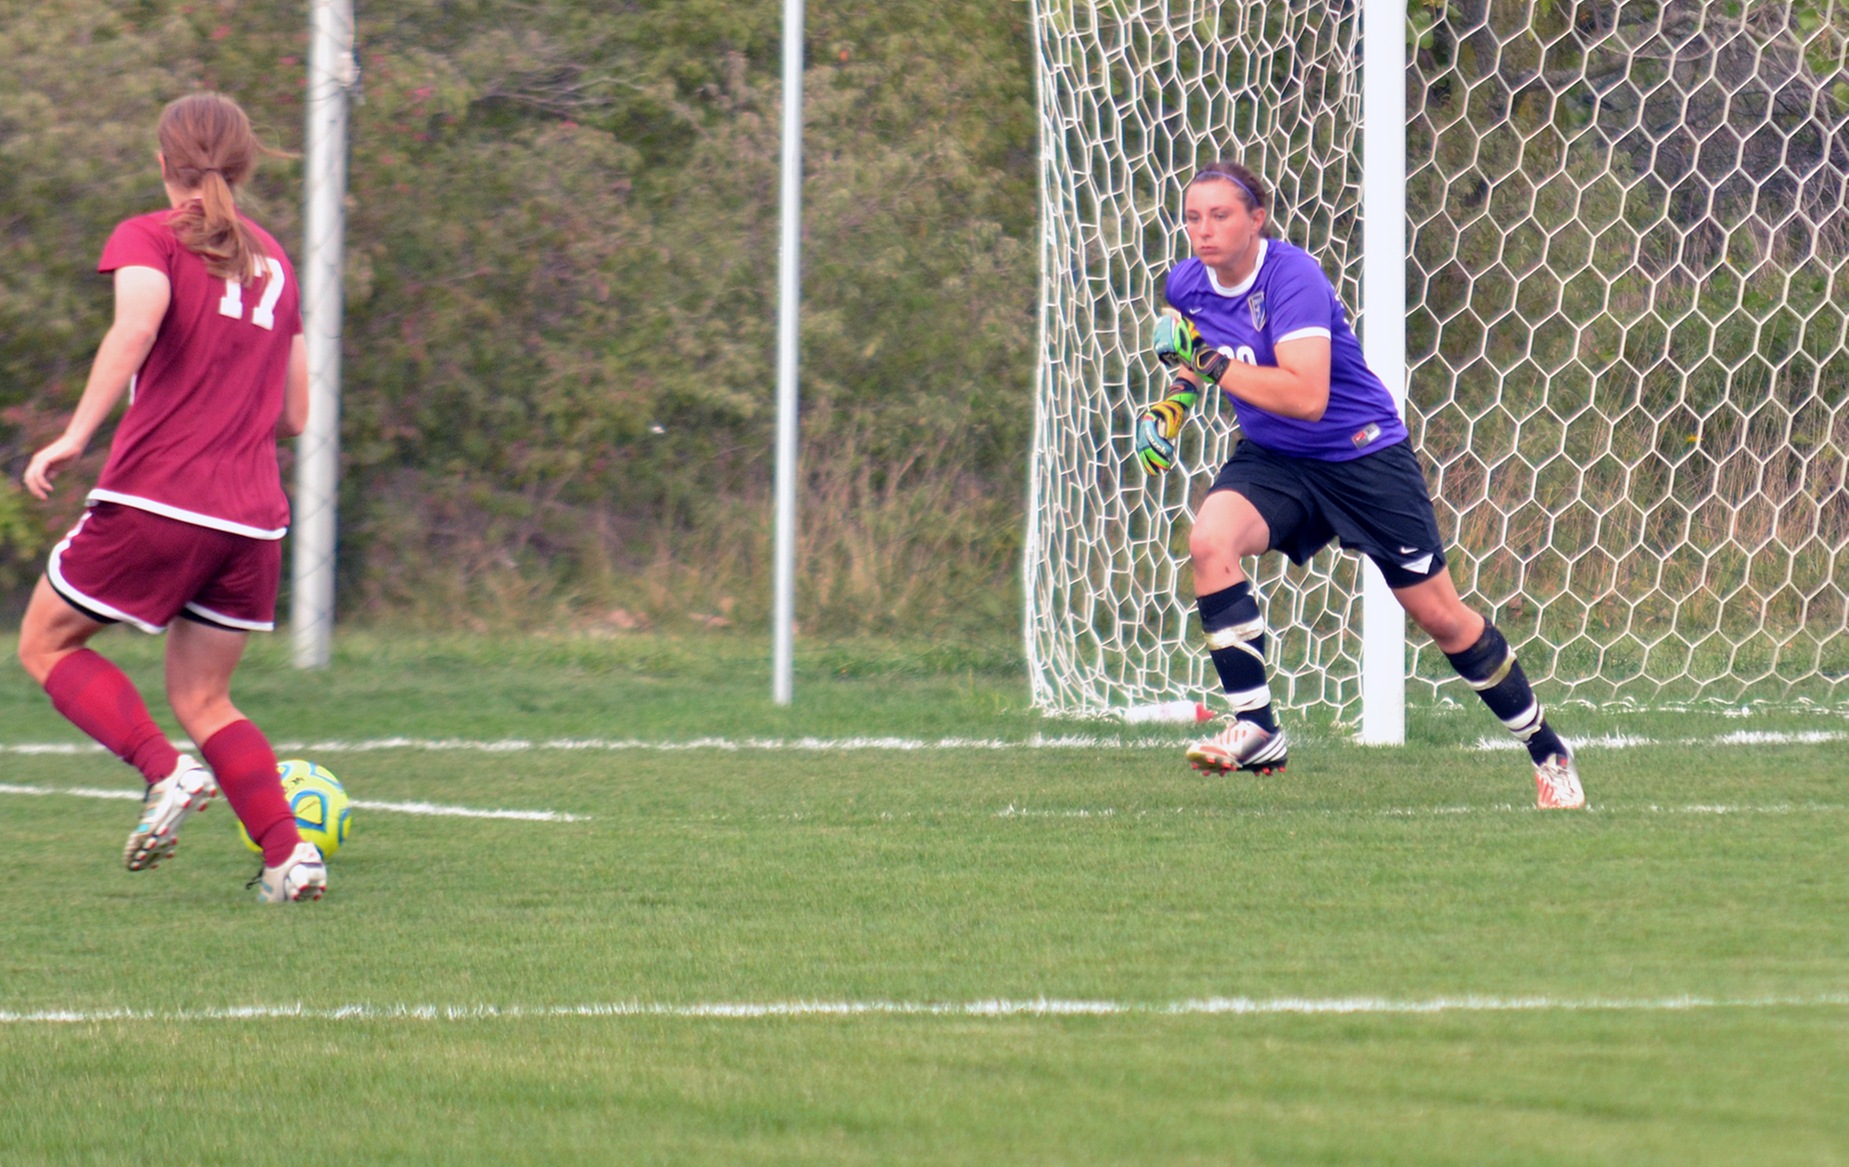 DC Holds on to 1-1 Tie at Earlham with Turner’s Play in Net